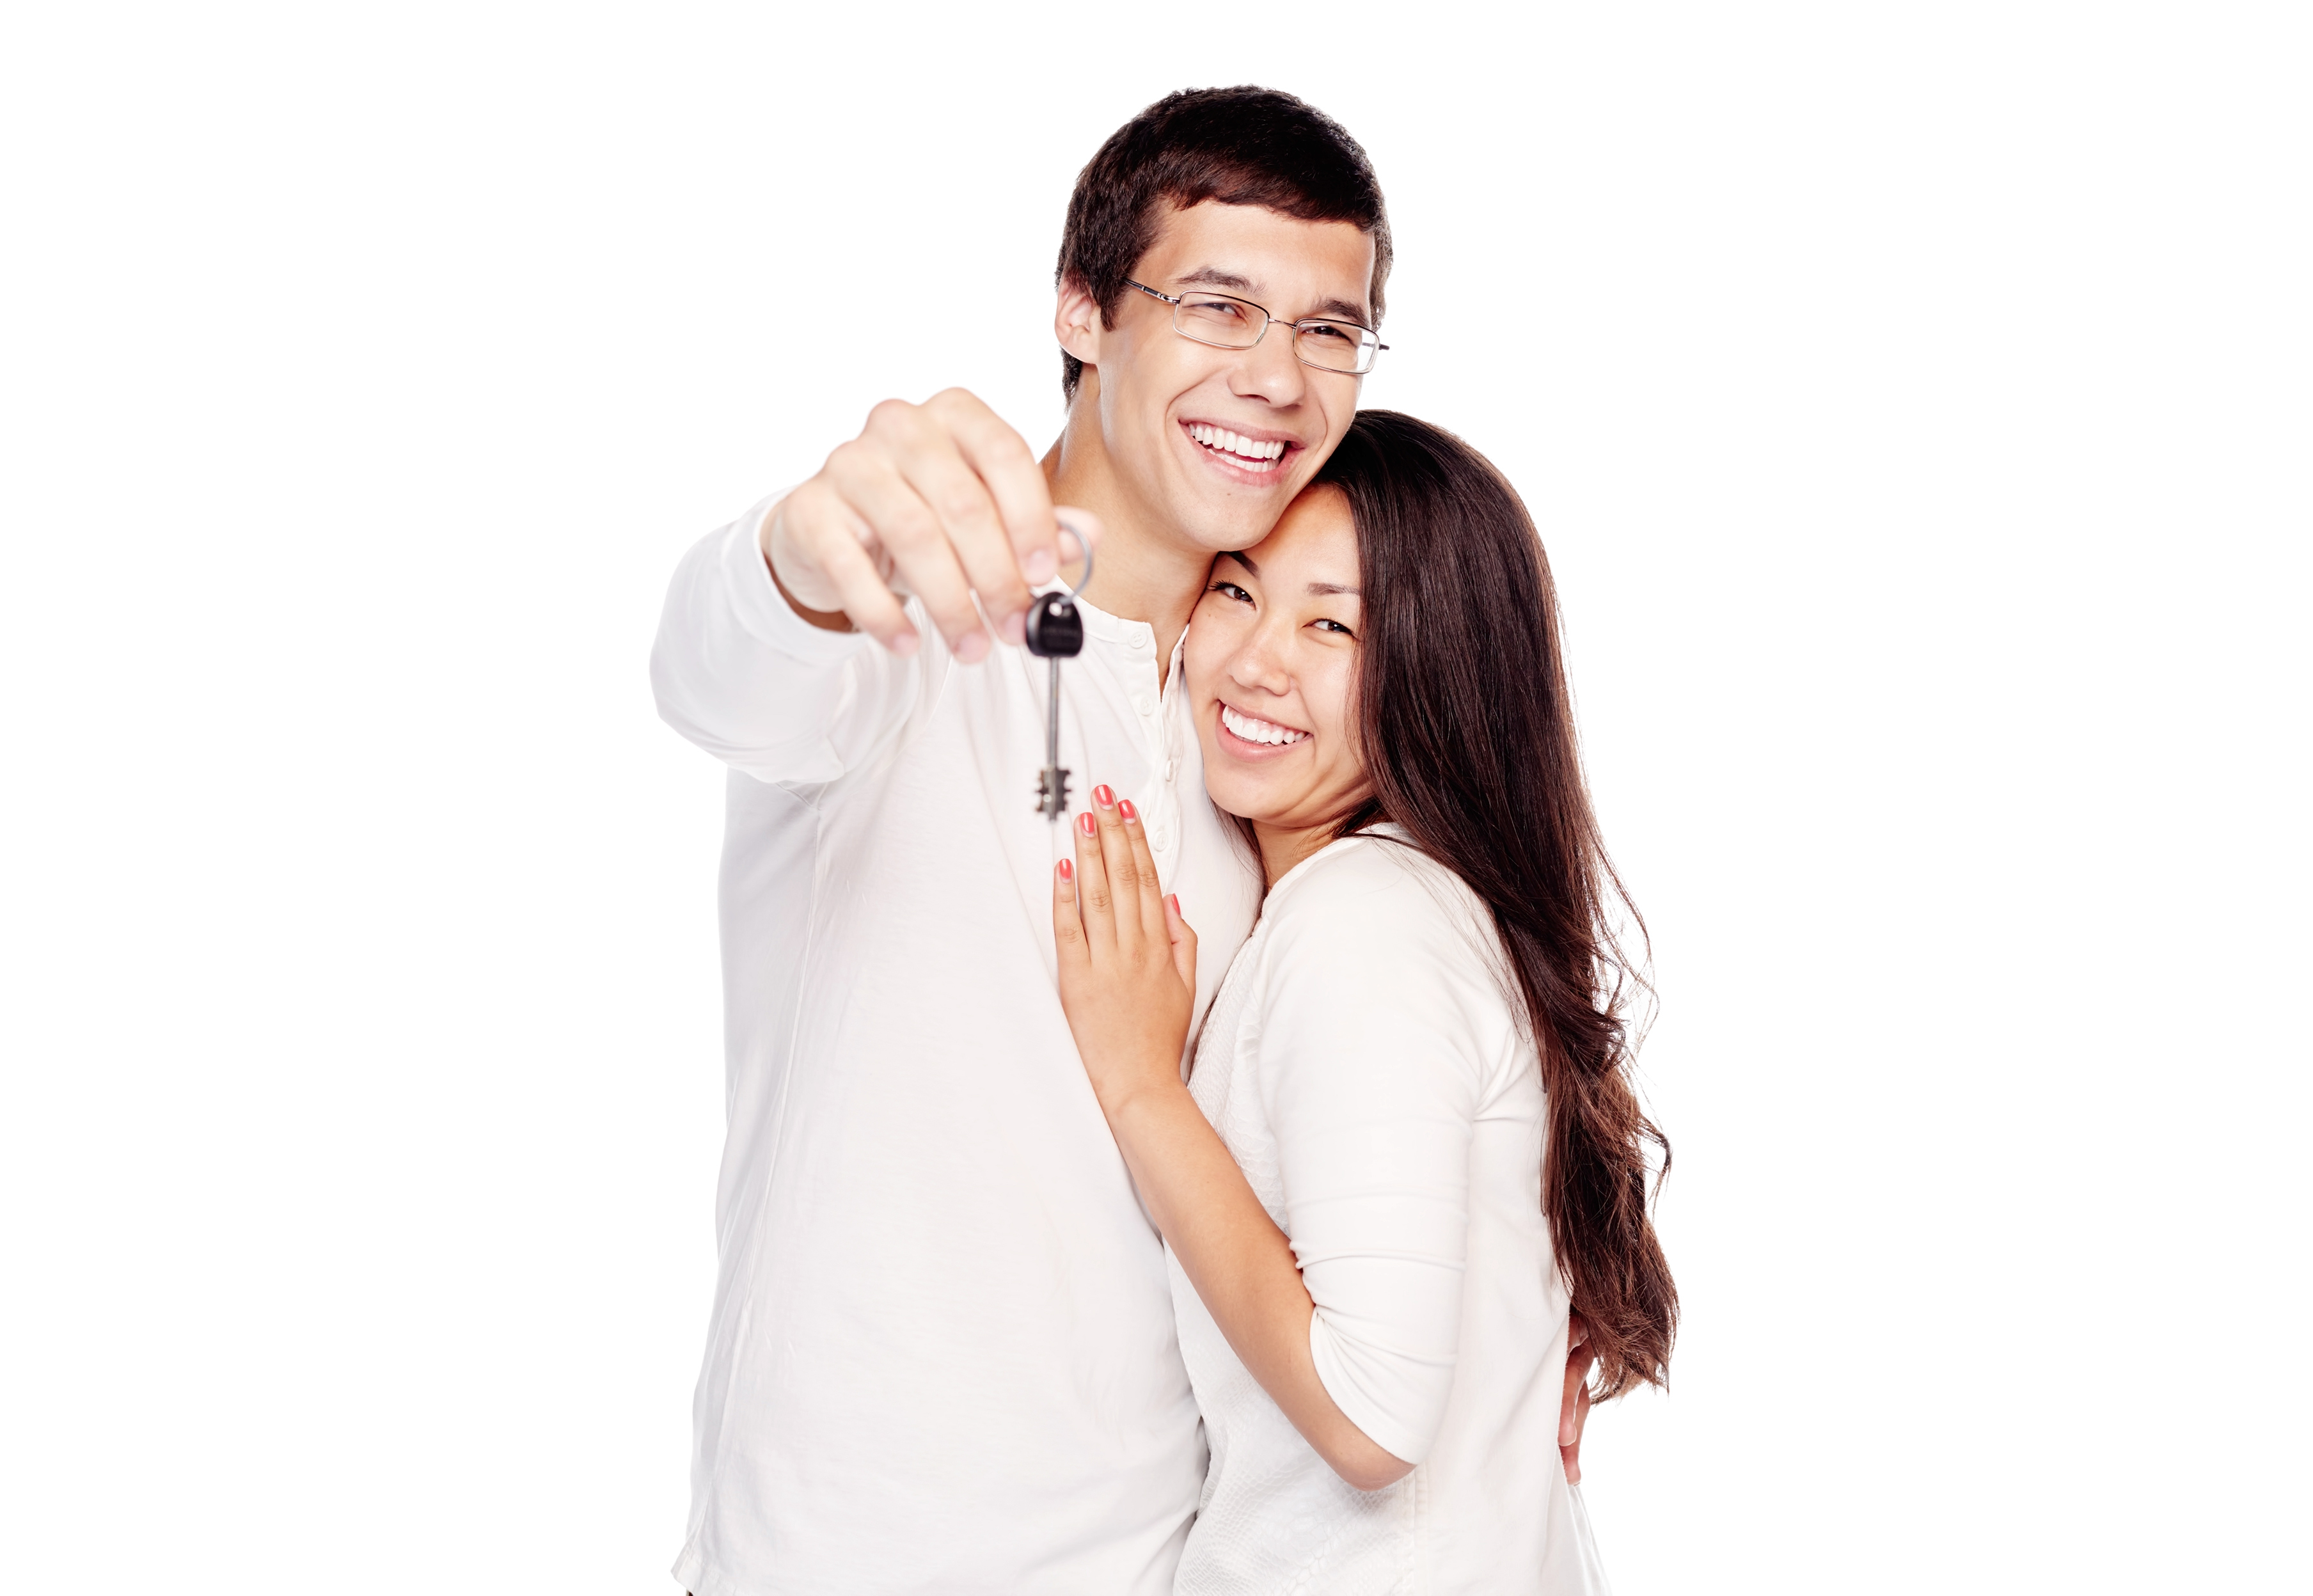 Lovely interracial couple, hispanic man and asian girl, showing key of their new house, hugging and smiling isolated on white background - real estate for young family concept